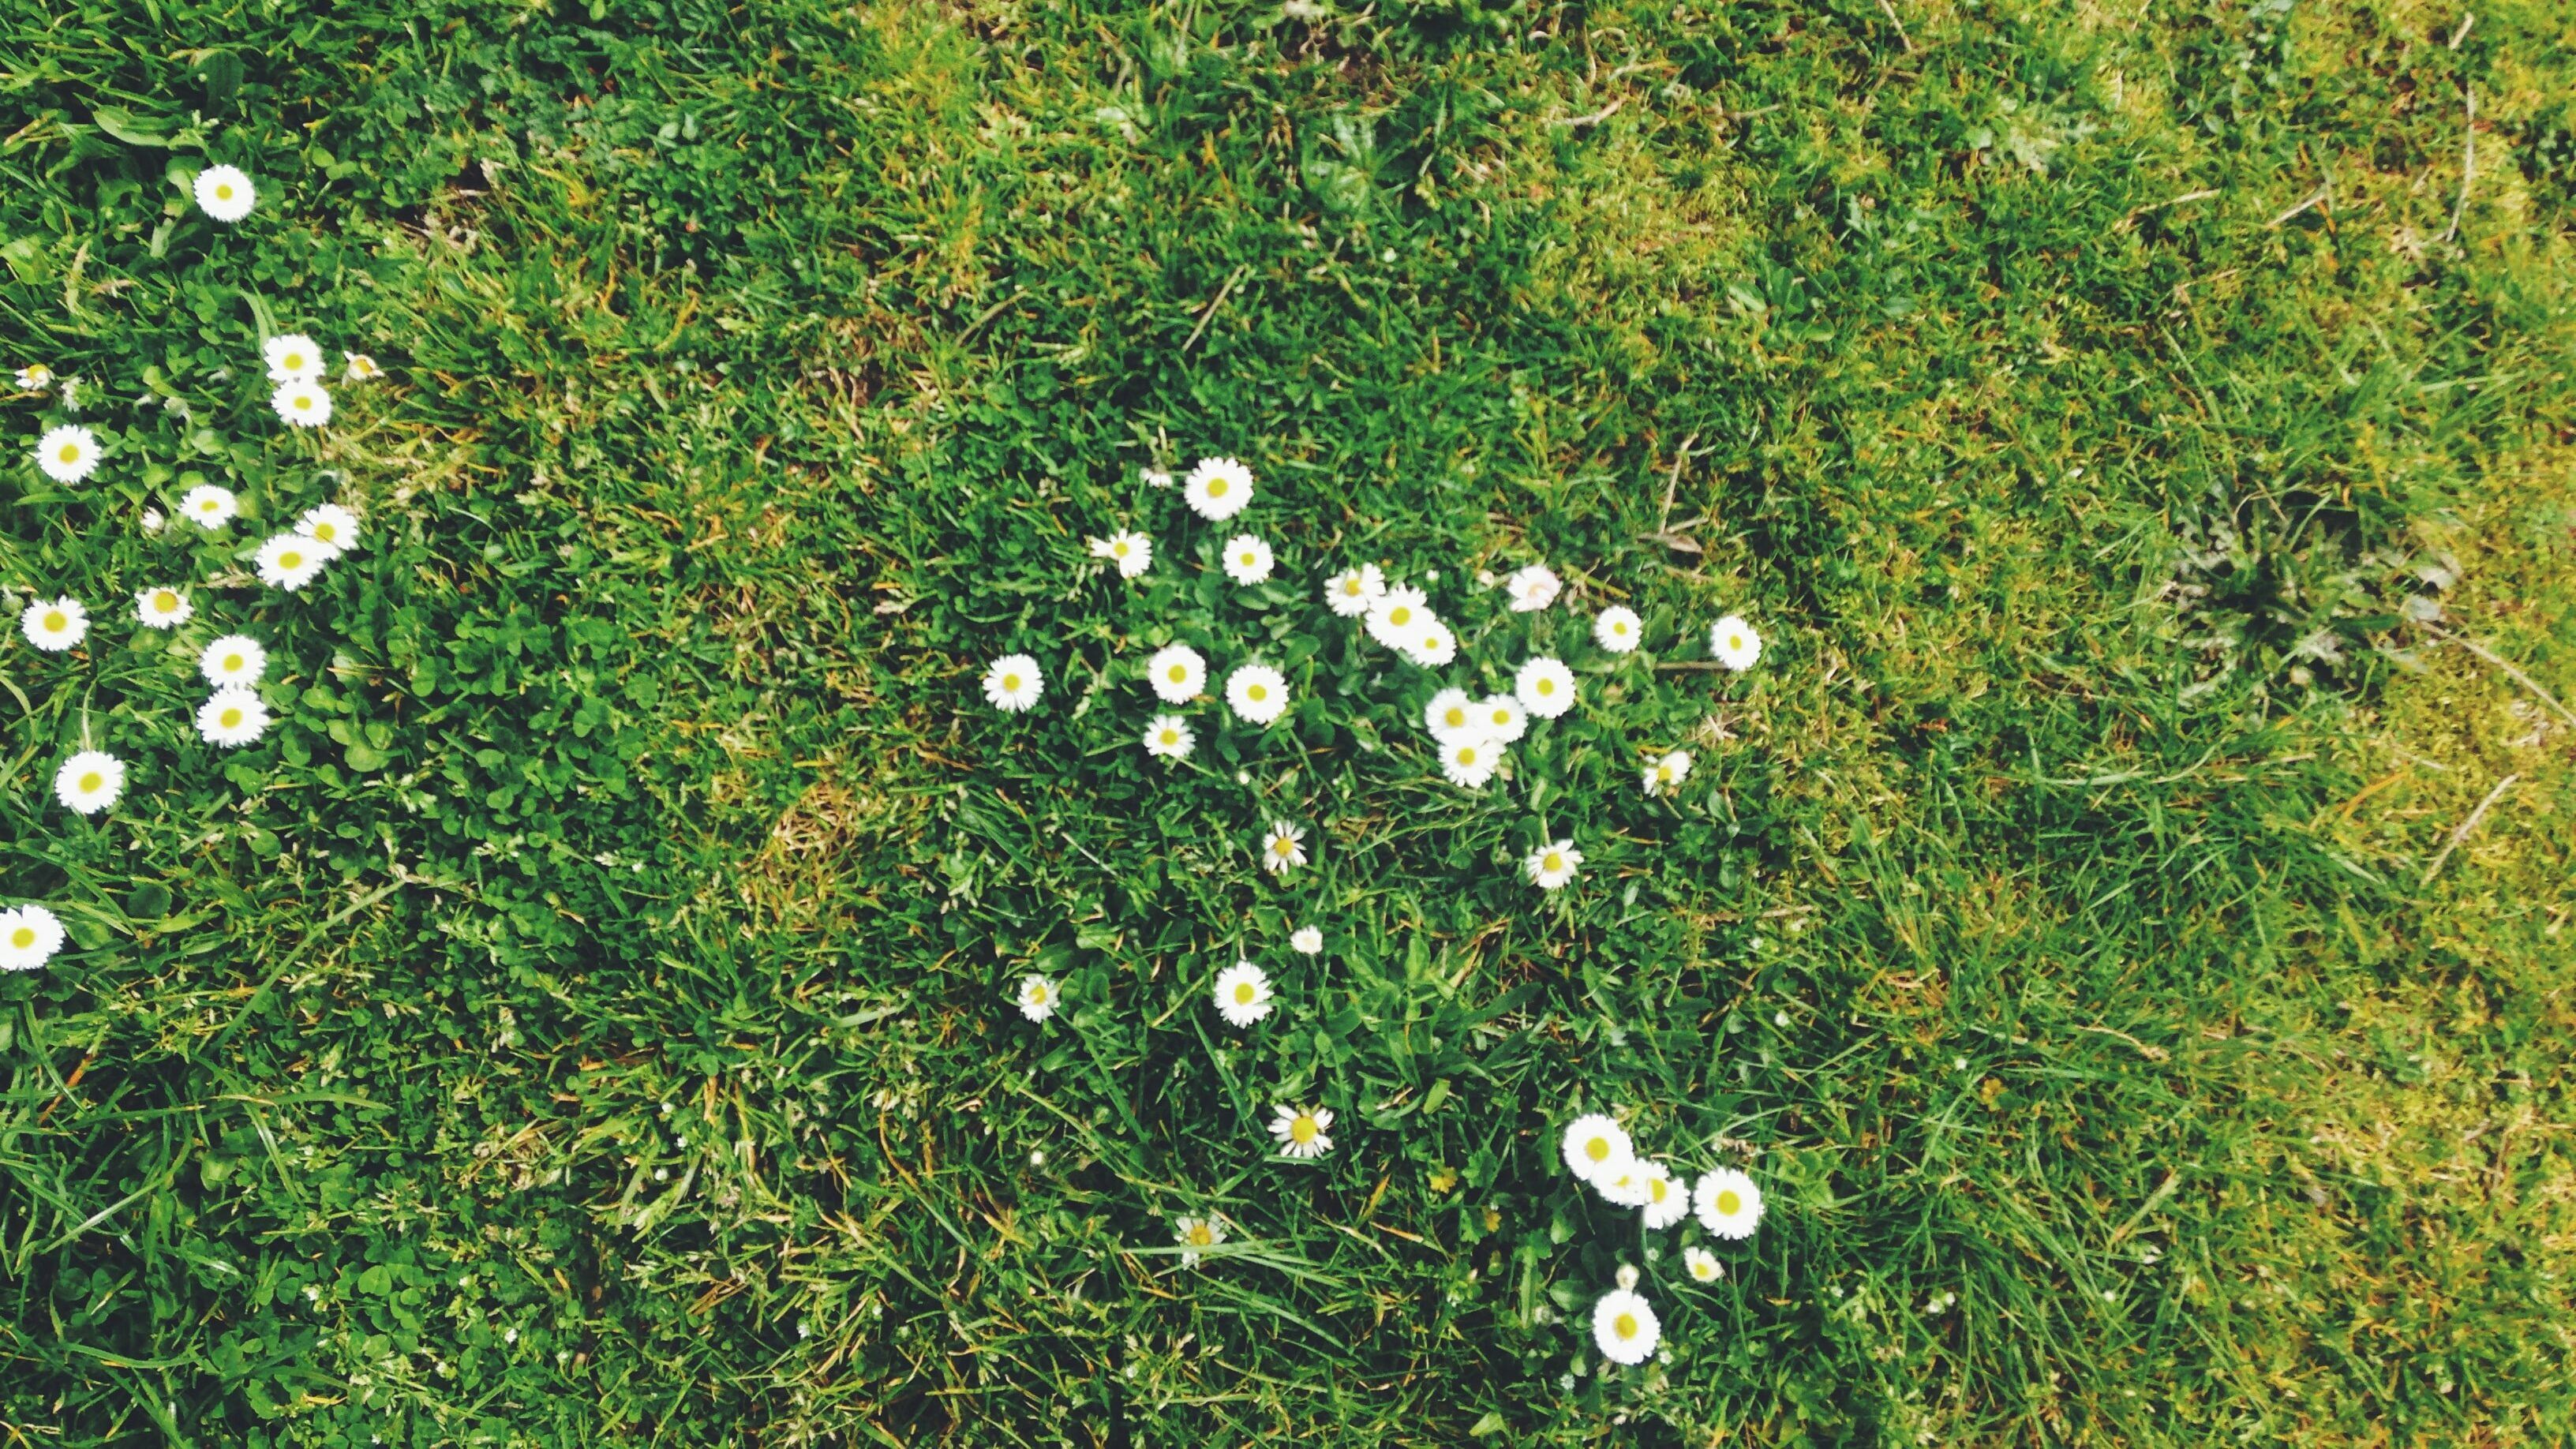 Overhead view of a grass lawn with flowering weeds scattered throughout.